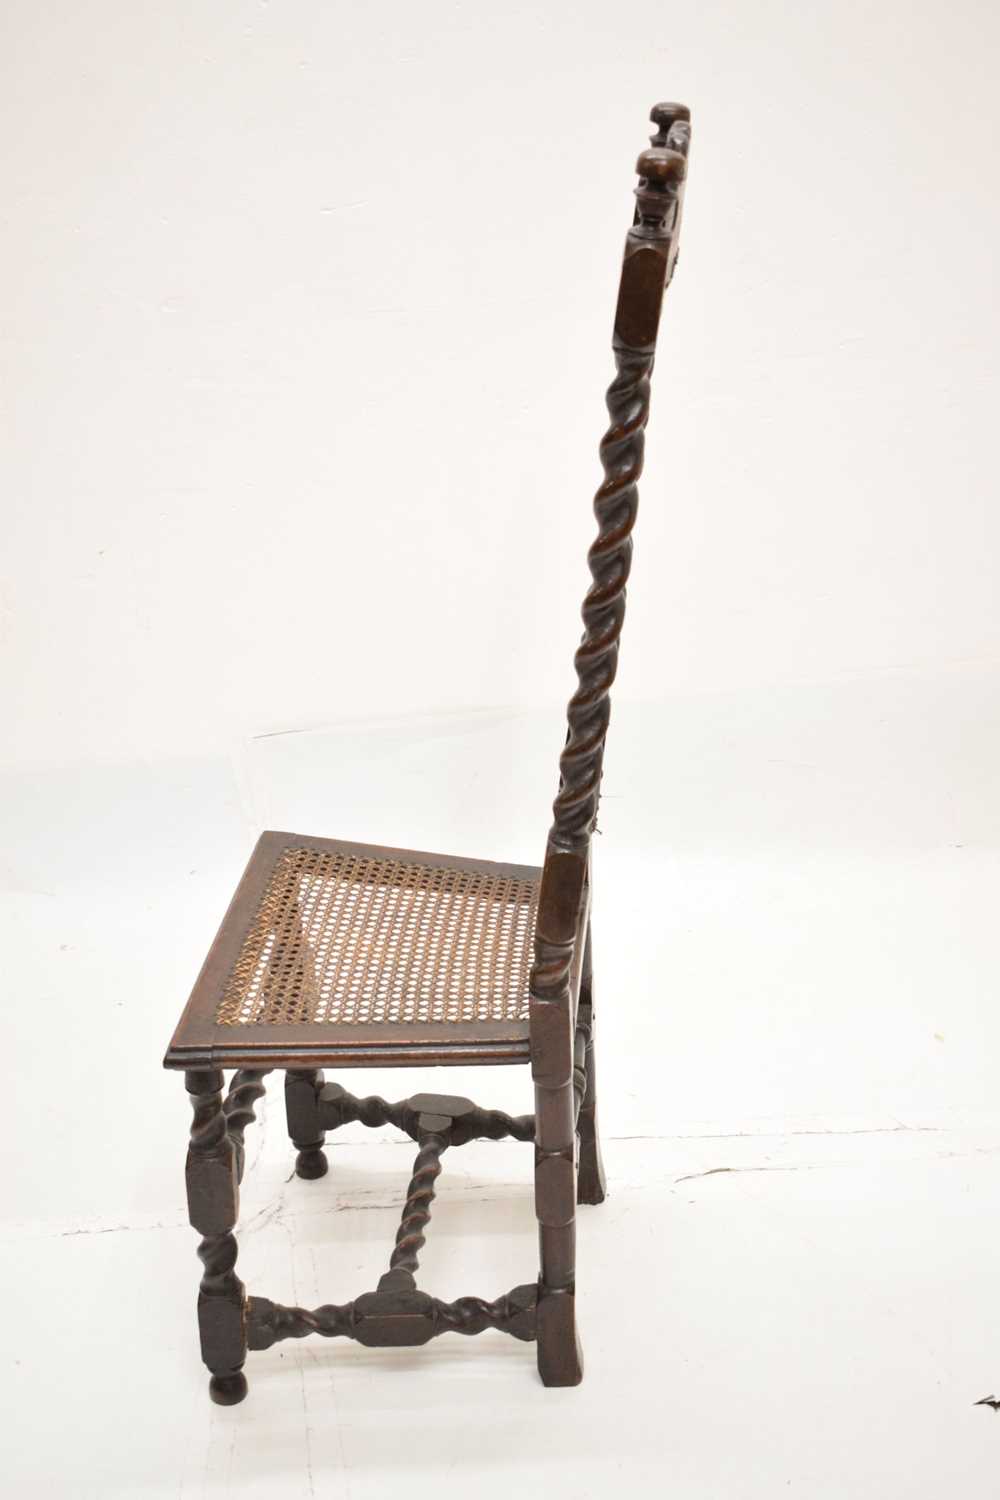 Late 17th century walnut and cane high-back chair - Image 10 of 15